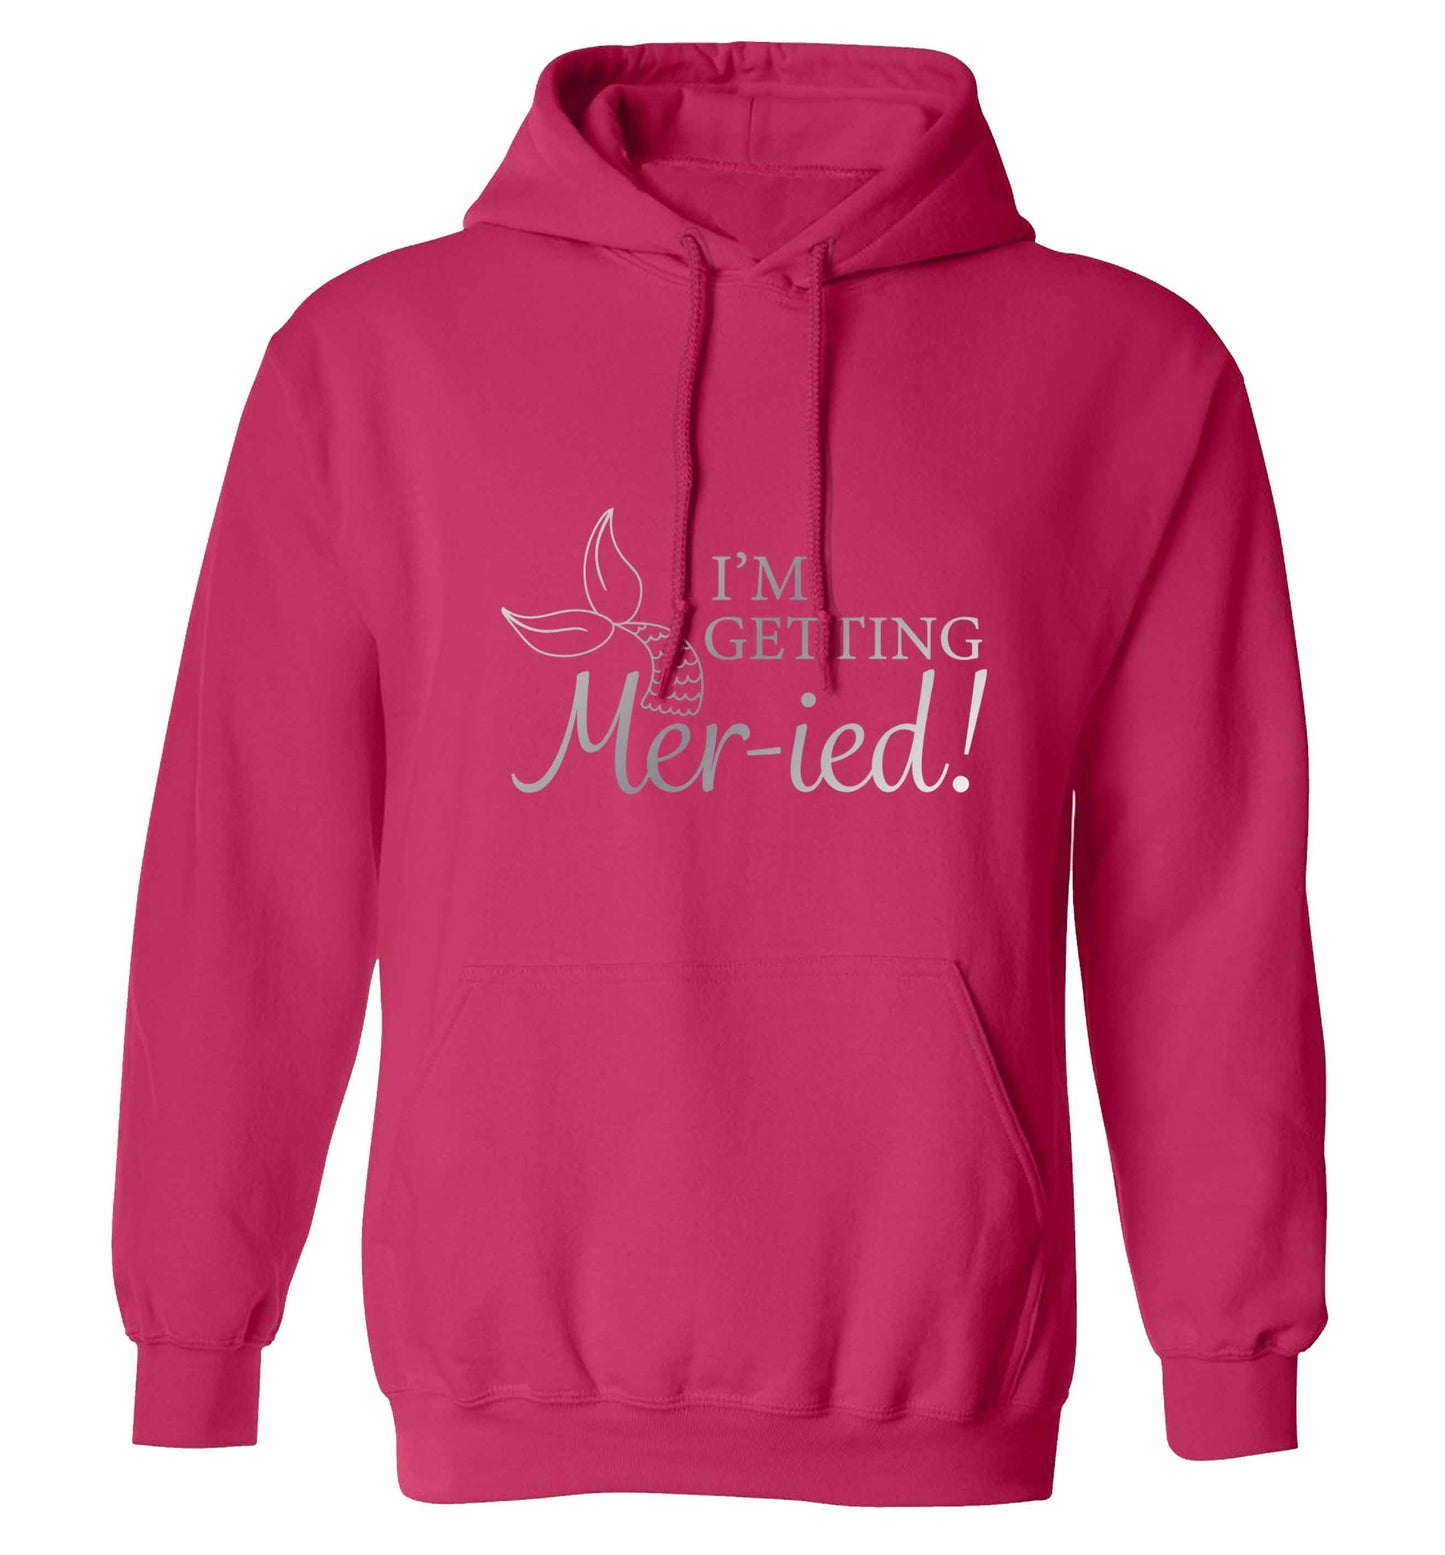 Personalised wedding thank you's Mr and Mrs wedding and date! Ideal wedding favours! adults unisex pink hoodie 2XL